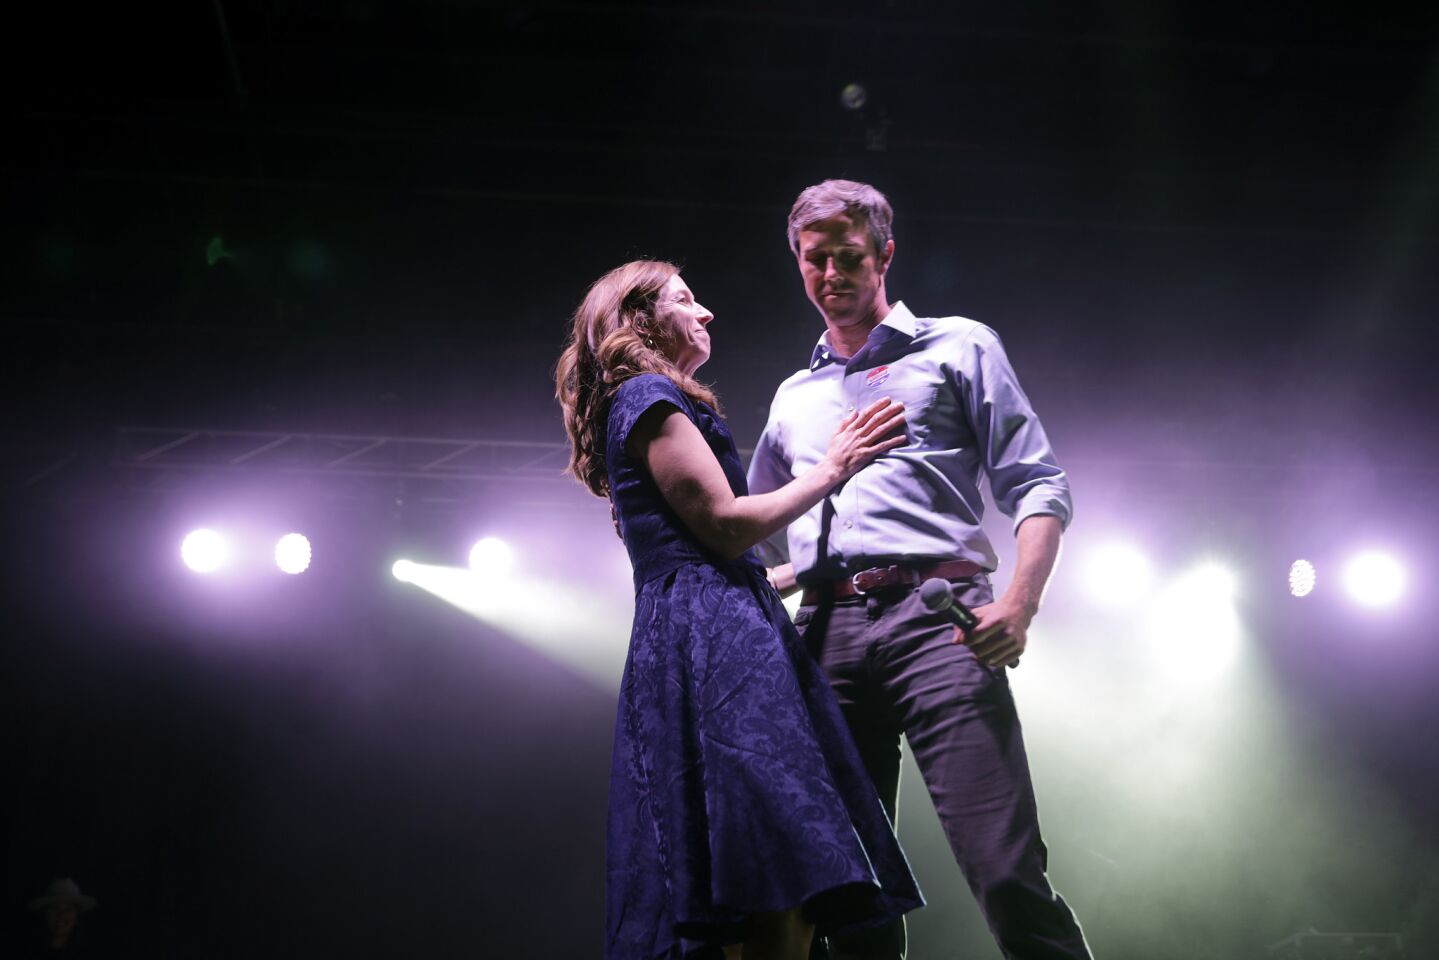 U.S. Senate candidate Beto O'Rourke and his wife, Amy Sanders, take the stage as he concedes.